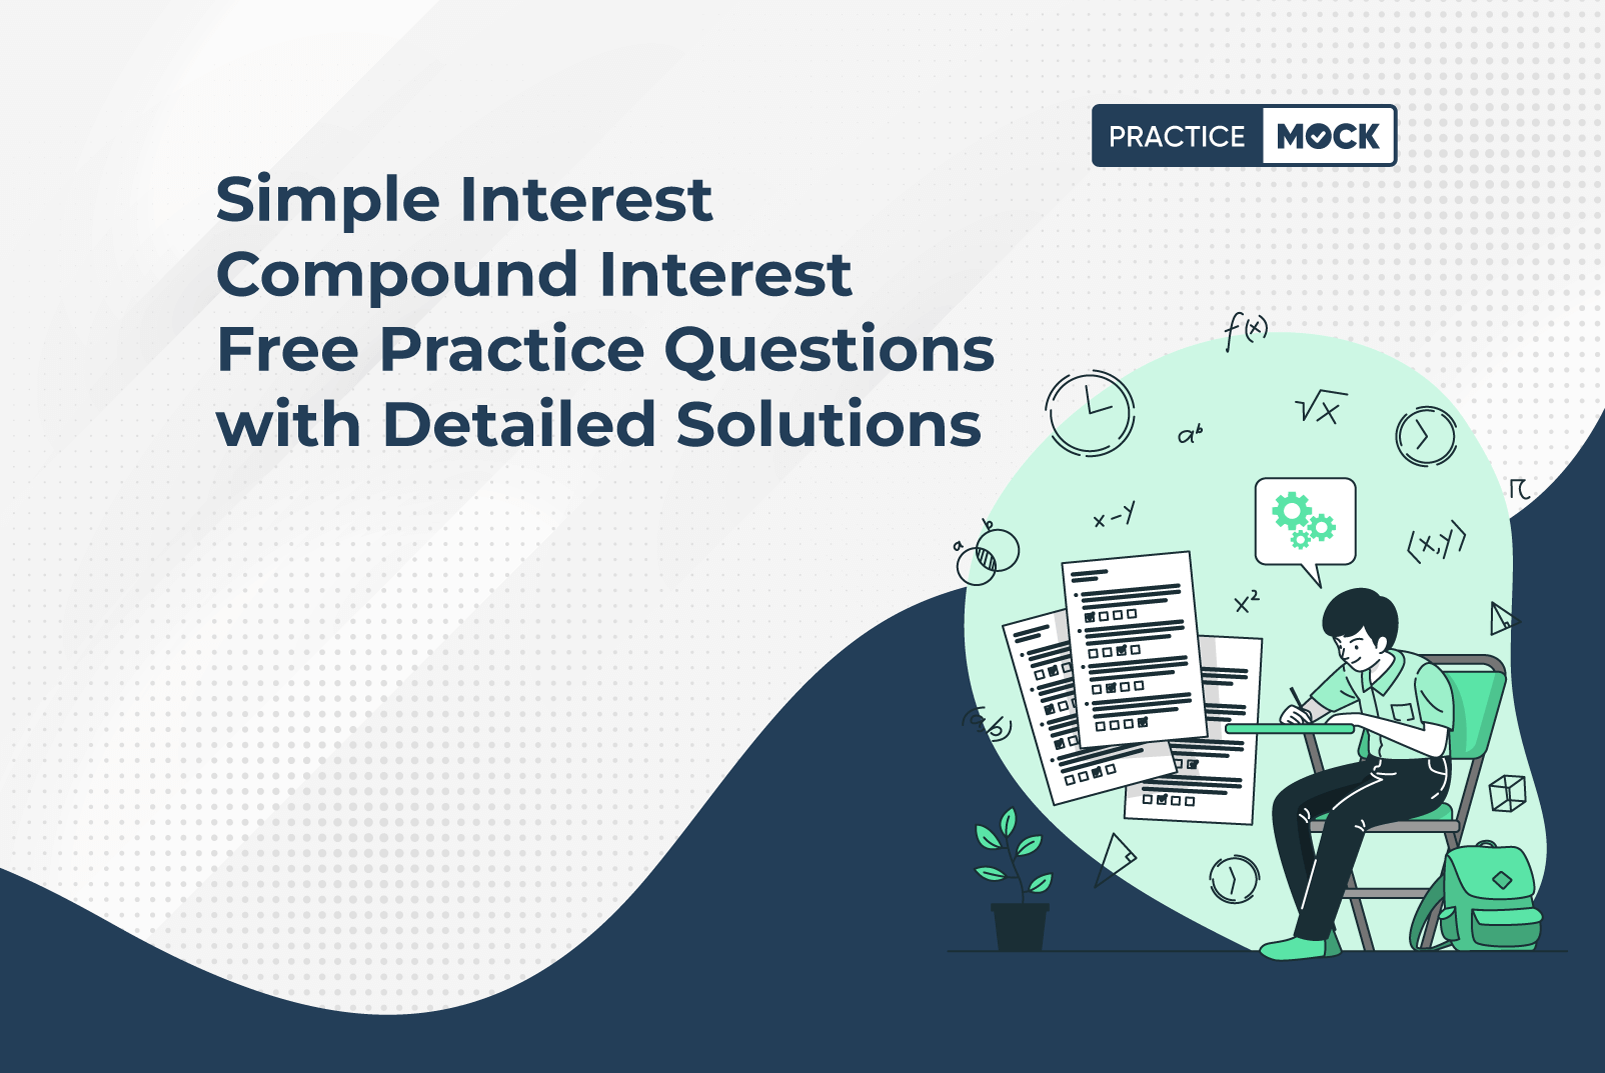 Simple Interest Compound Interest Free Practice Questions with Detailed Solutions